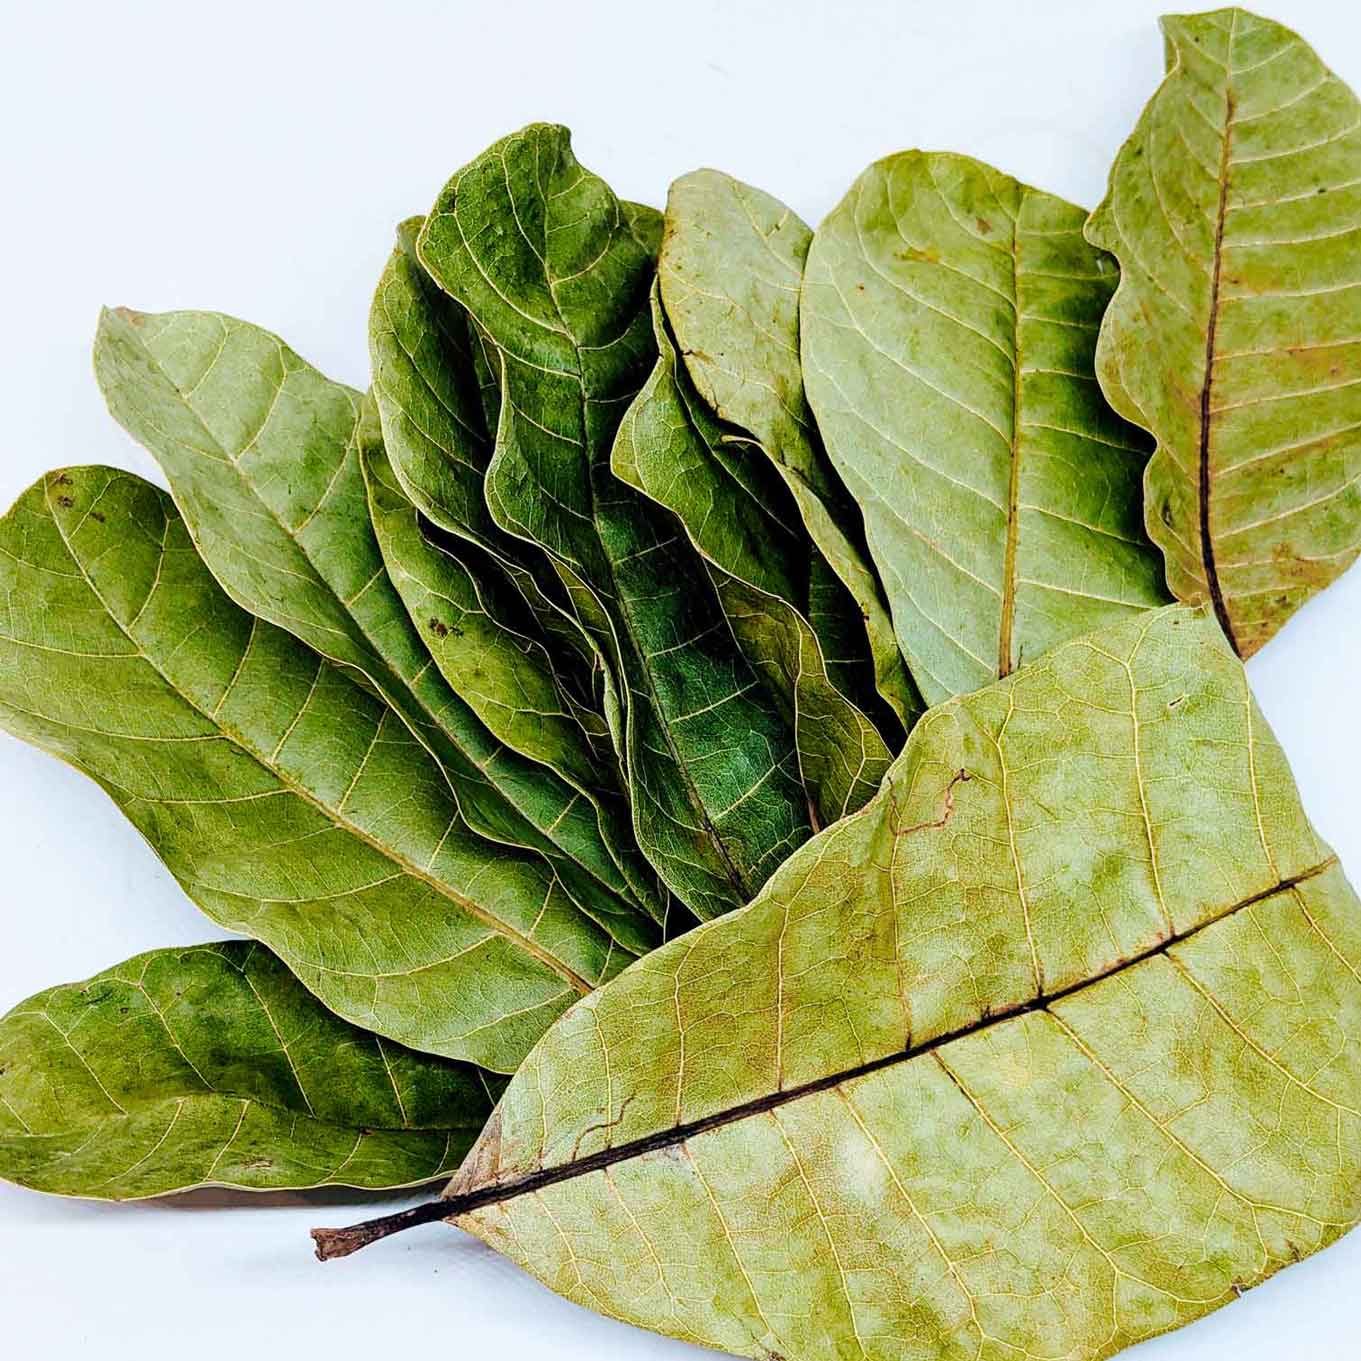 500+ Cashew Leaves for Healthy Living,Dried Cashew Leaves (Anacardium occidentale) | Ceylon Organic-4